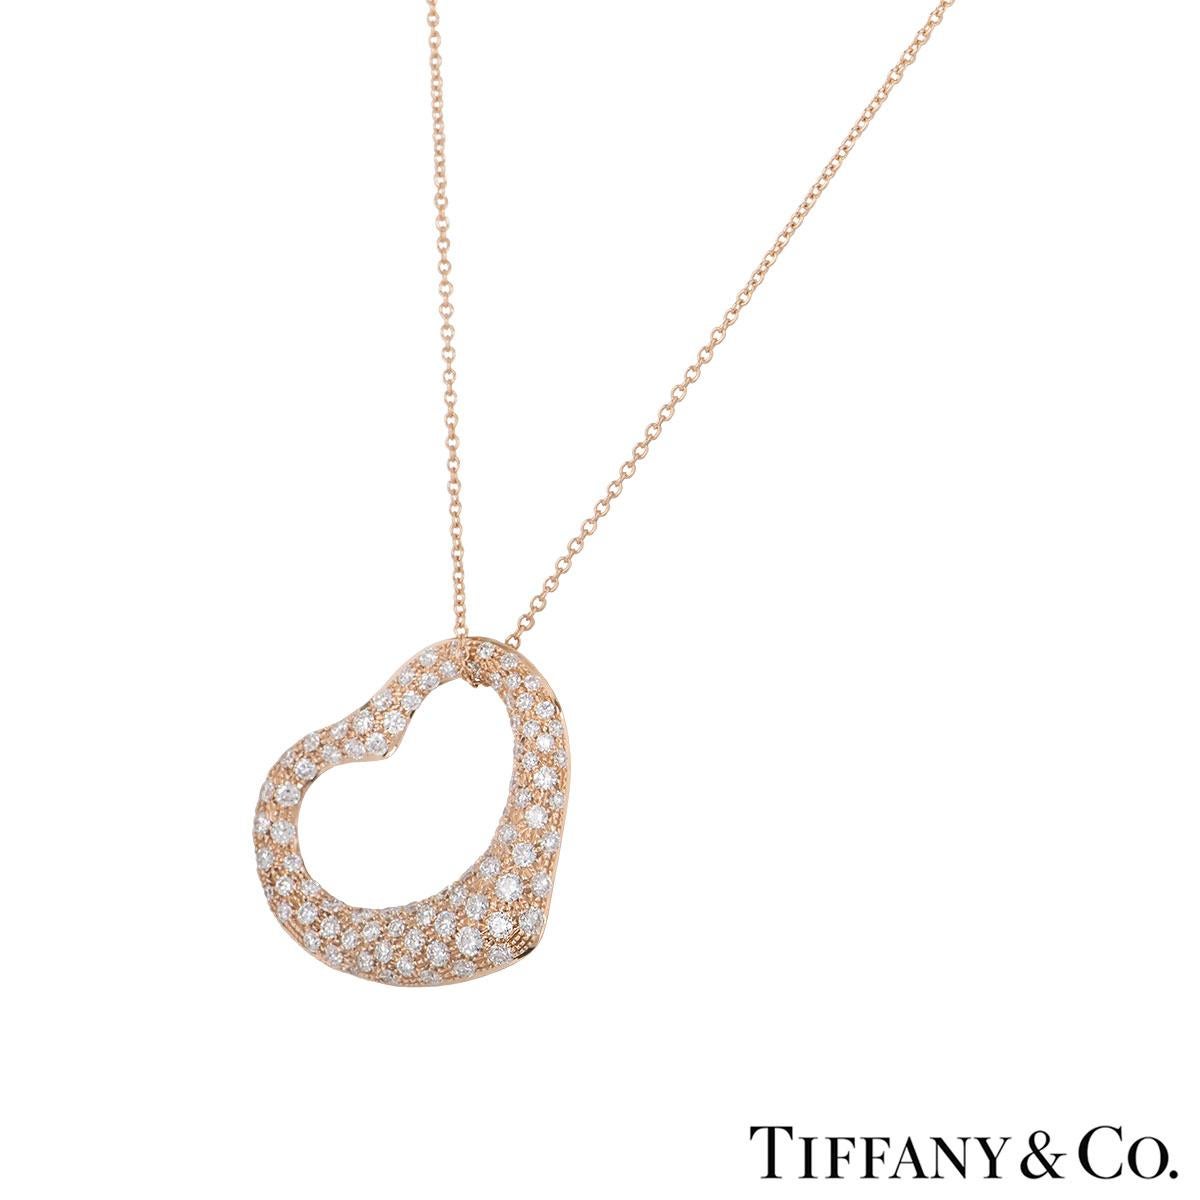 A beautiful 18k rose gold diamond heart necklace by Tiffany & Co. from the Elsa Peretti collection. The necklace comprises of an open work heart motif set with pave round brilliant cut diamonds. The diamonds have a total weight of approximately